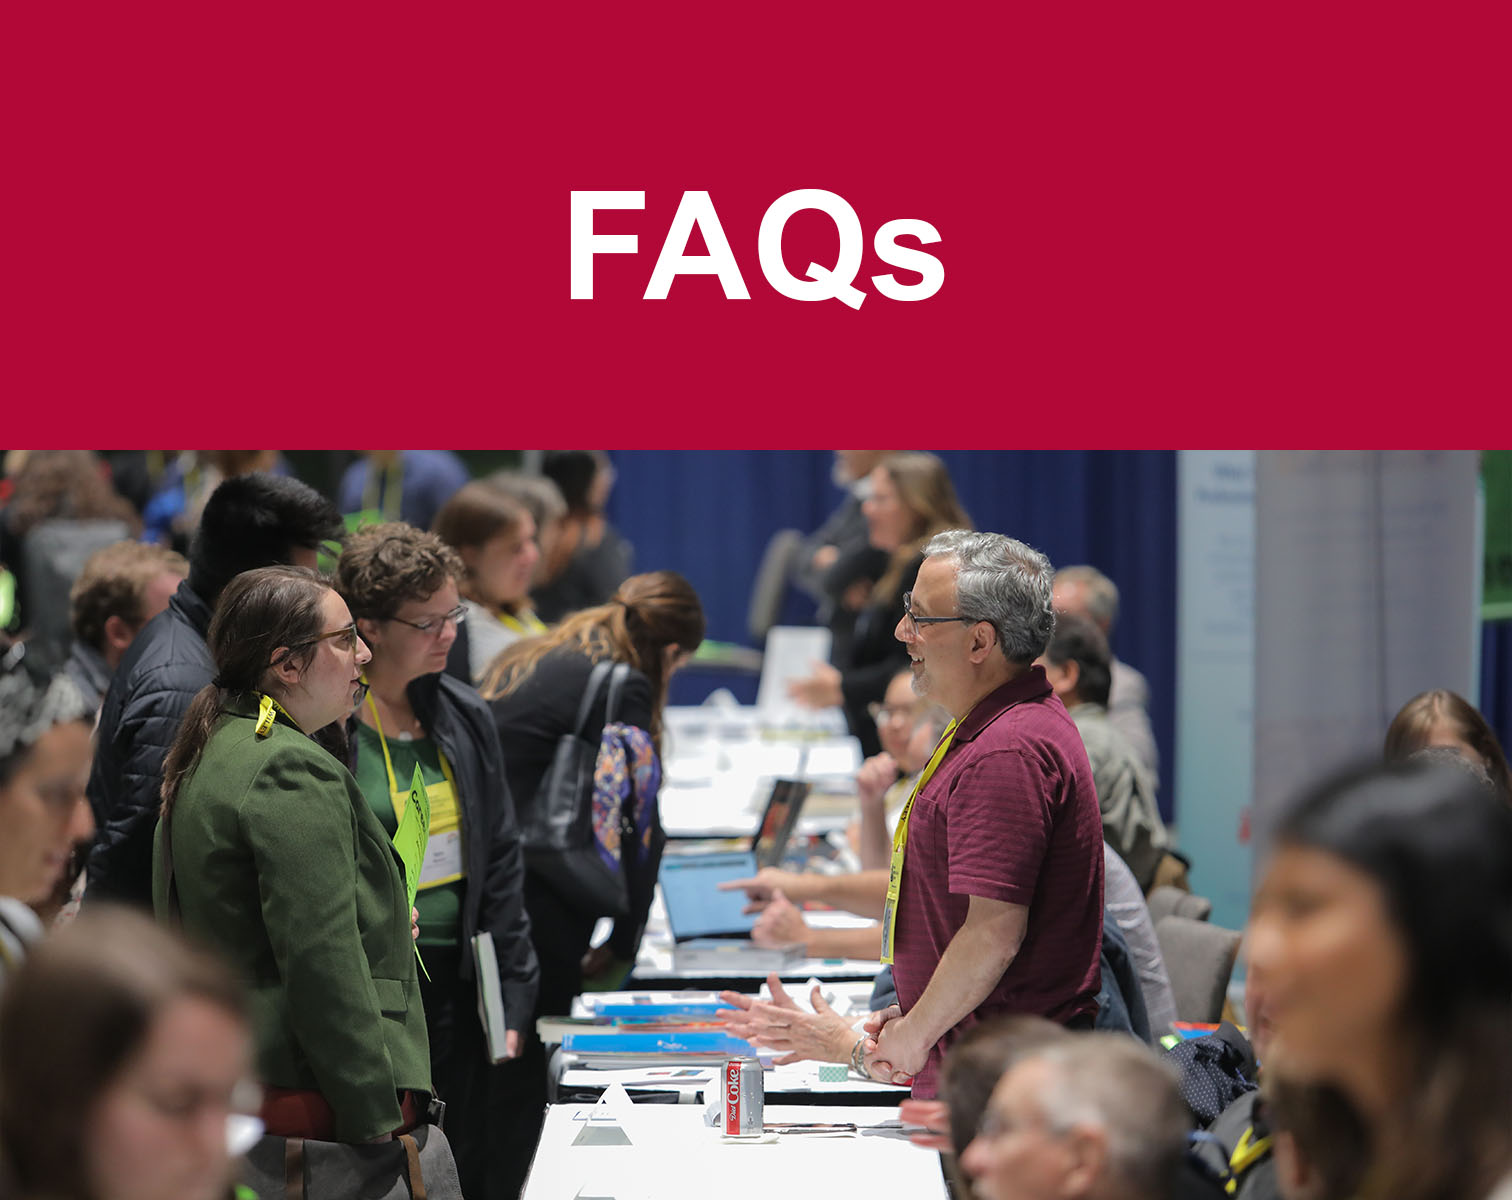 Frequently Asked Questions on Member referral program with an image of people gathering around an exhibit hall